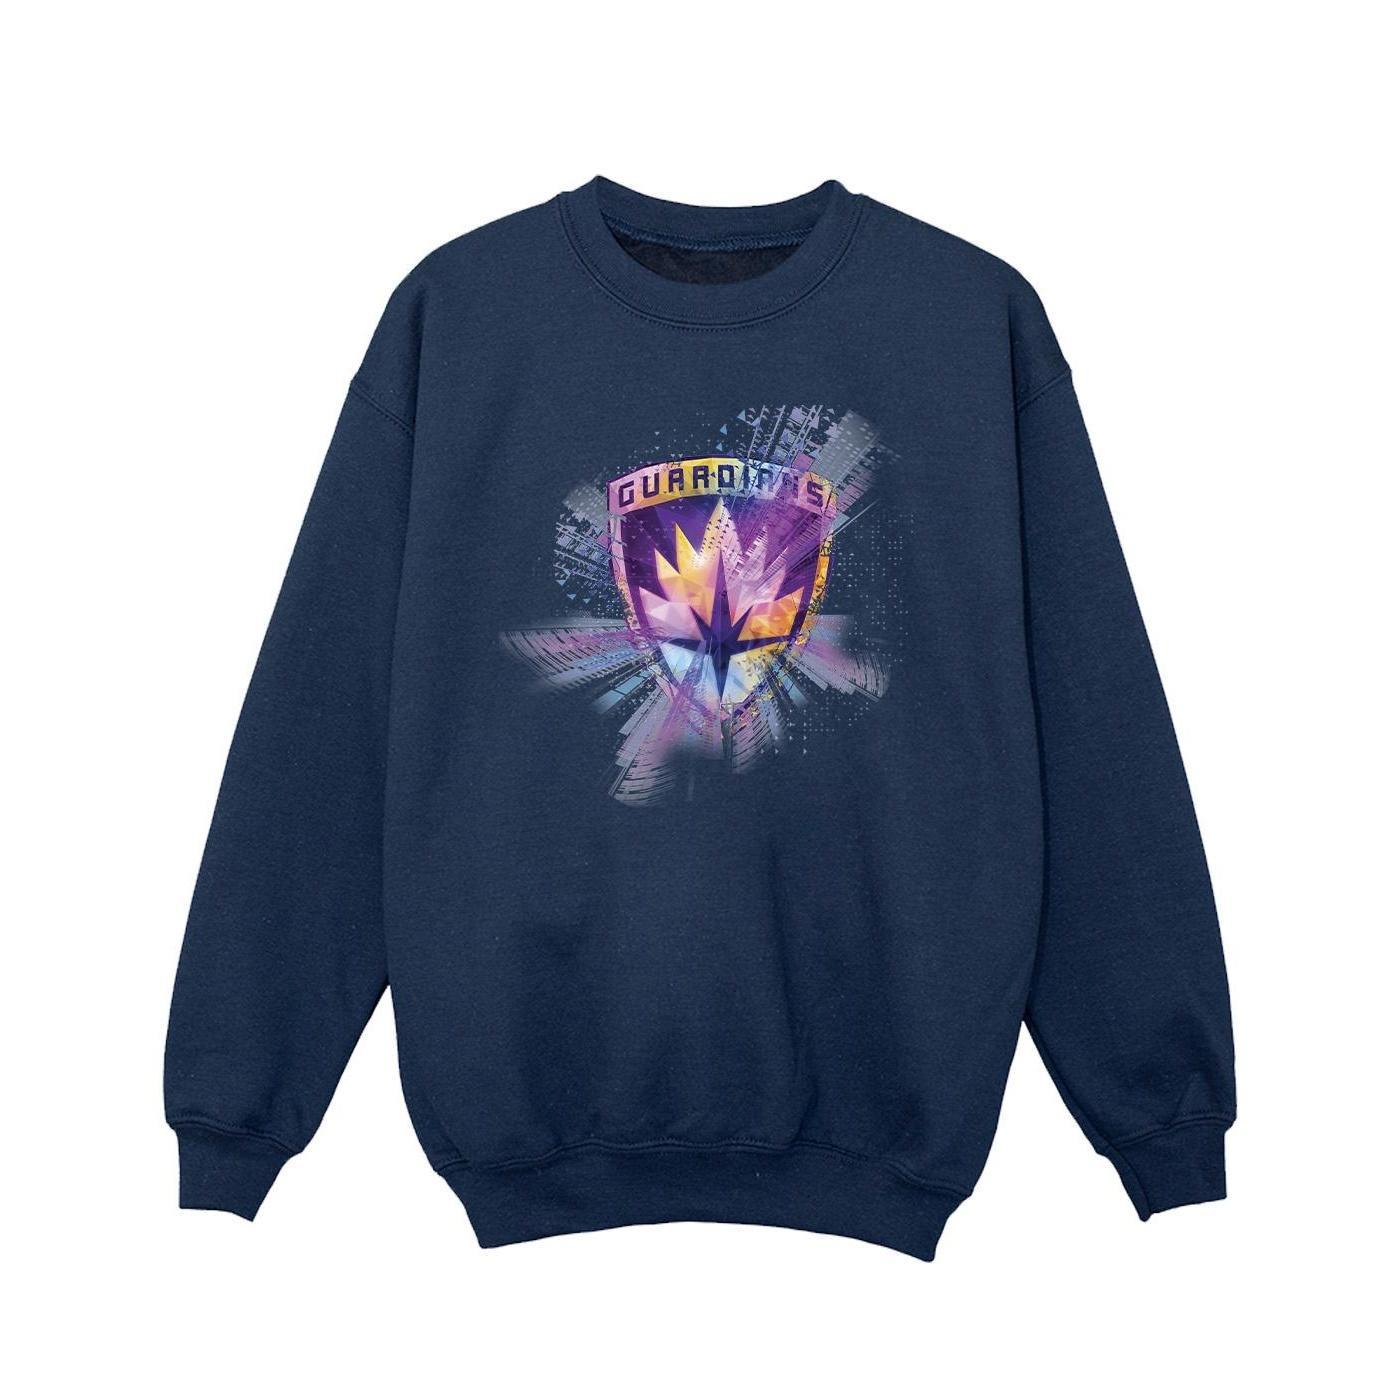 Marvel Girls Guardians Of The Galaxy Abstract Star Lord Sweatshirt (Navy Blue) (5-6 Years)